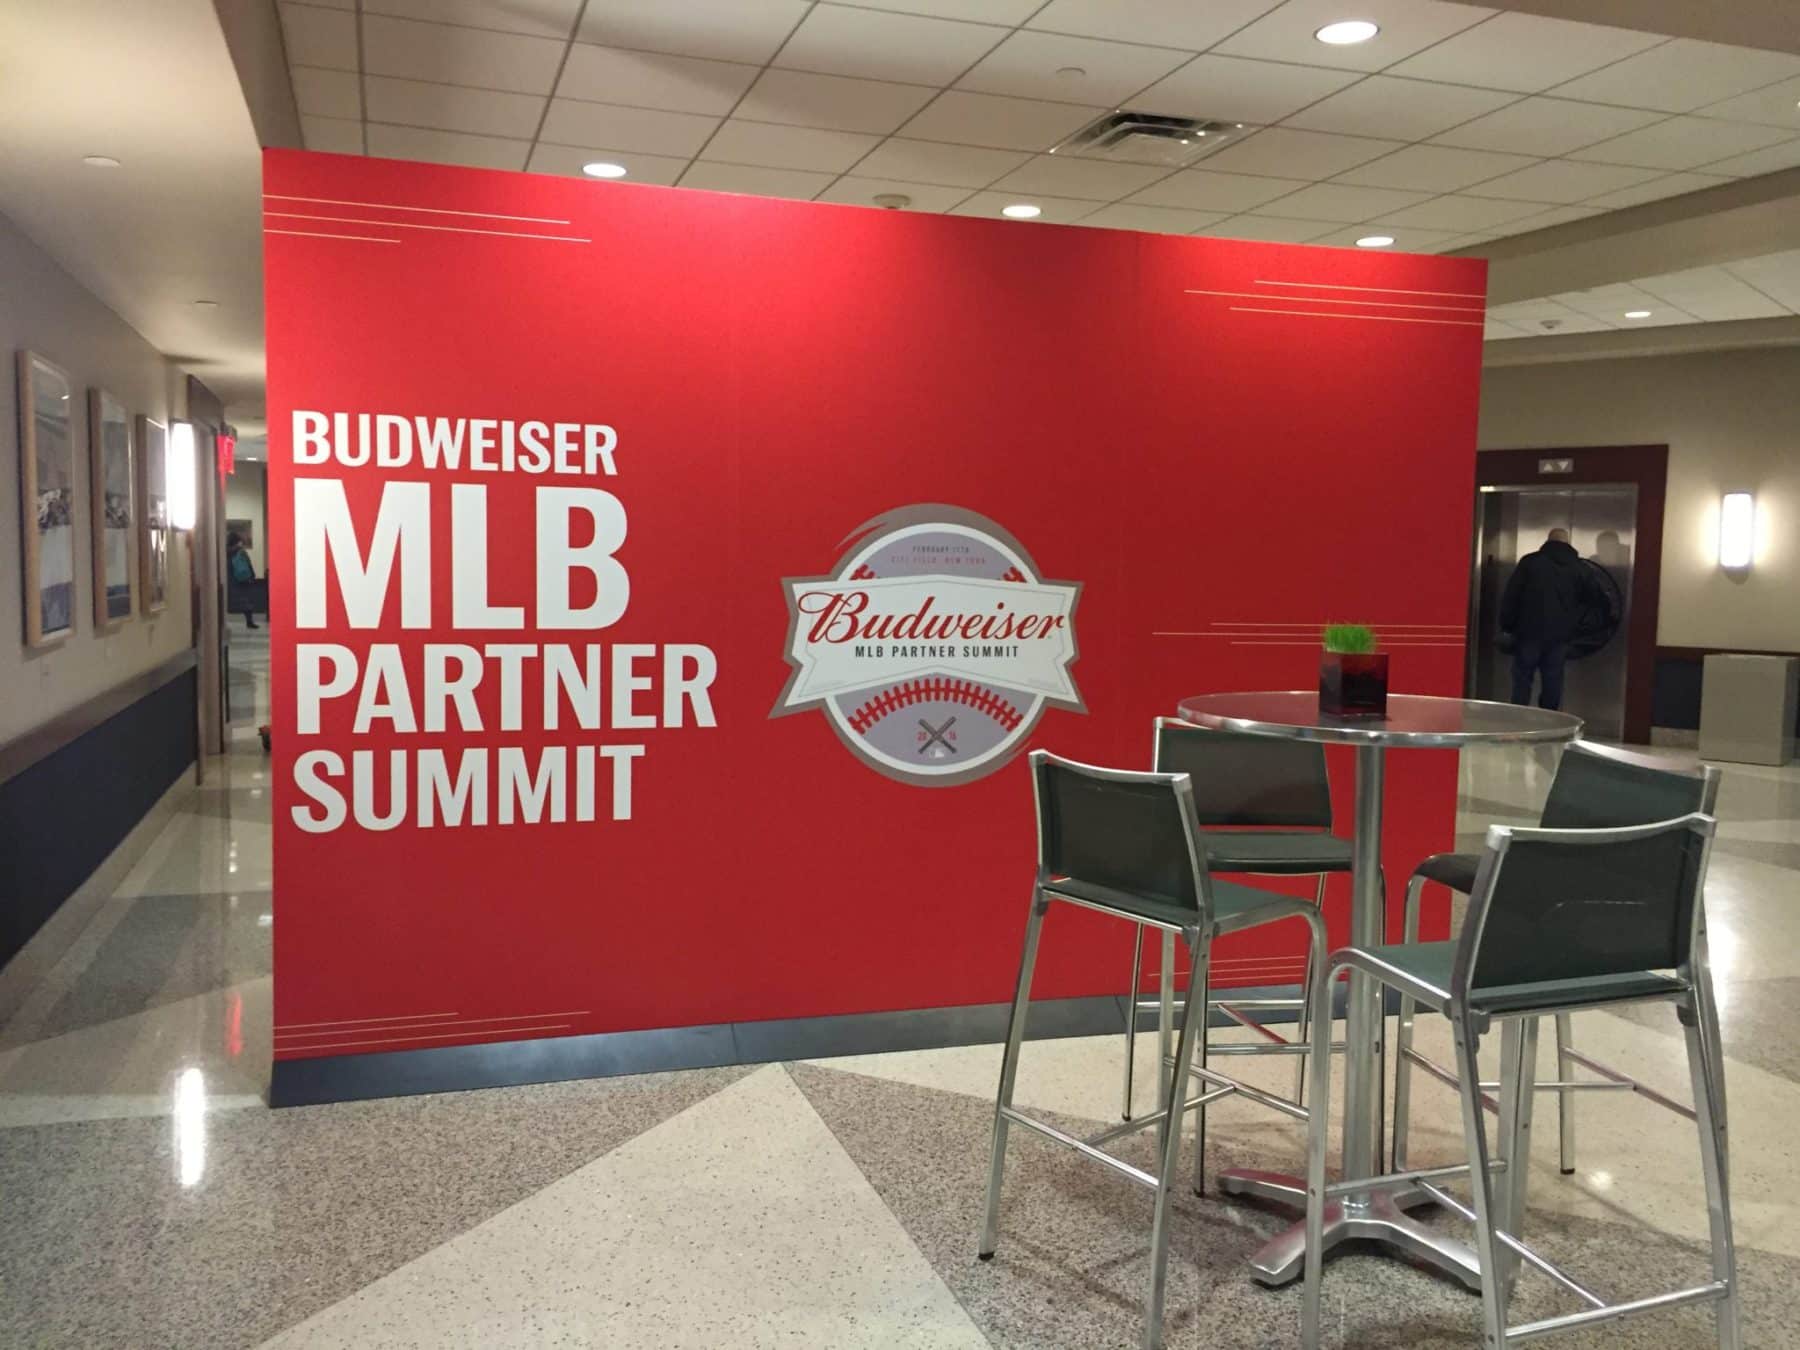 Citi Field Summit Event Materials - Printed and Installed by GSB Digital